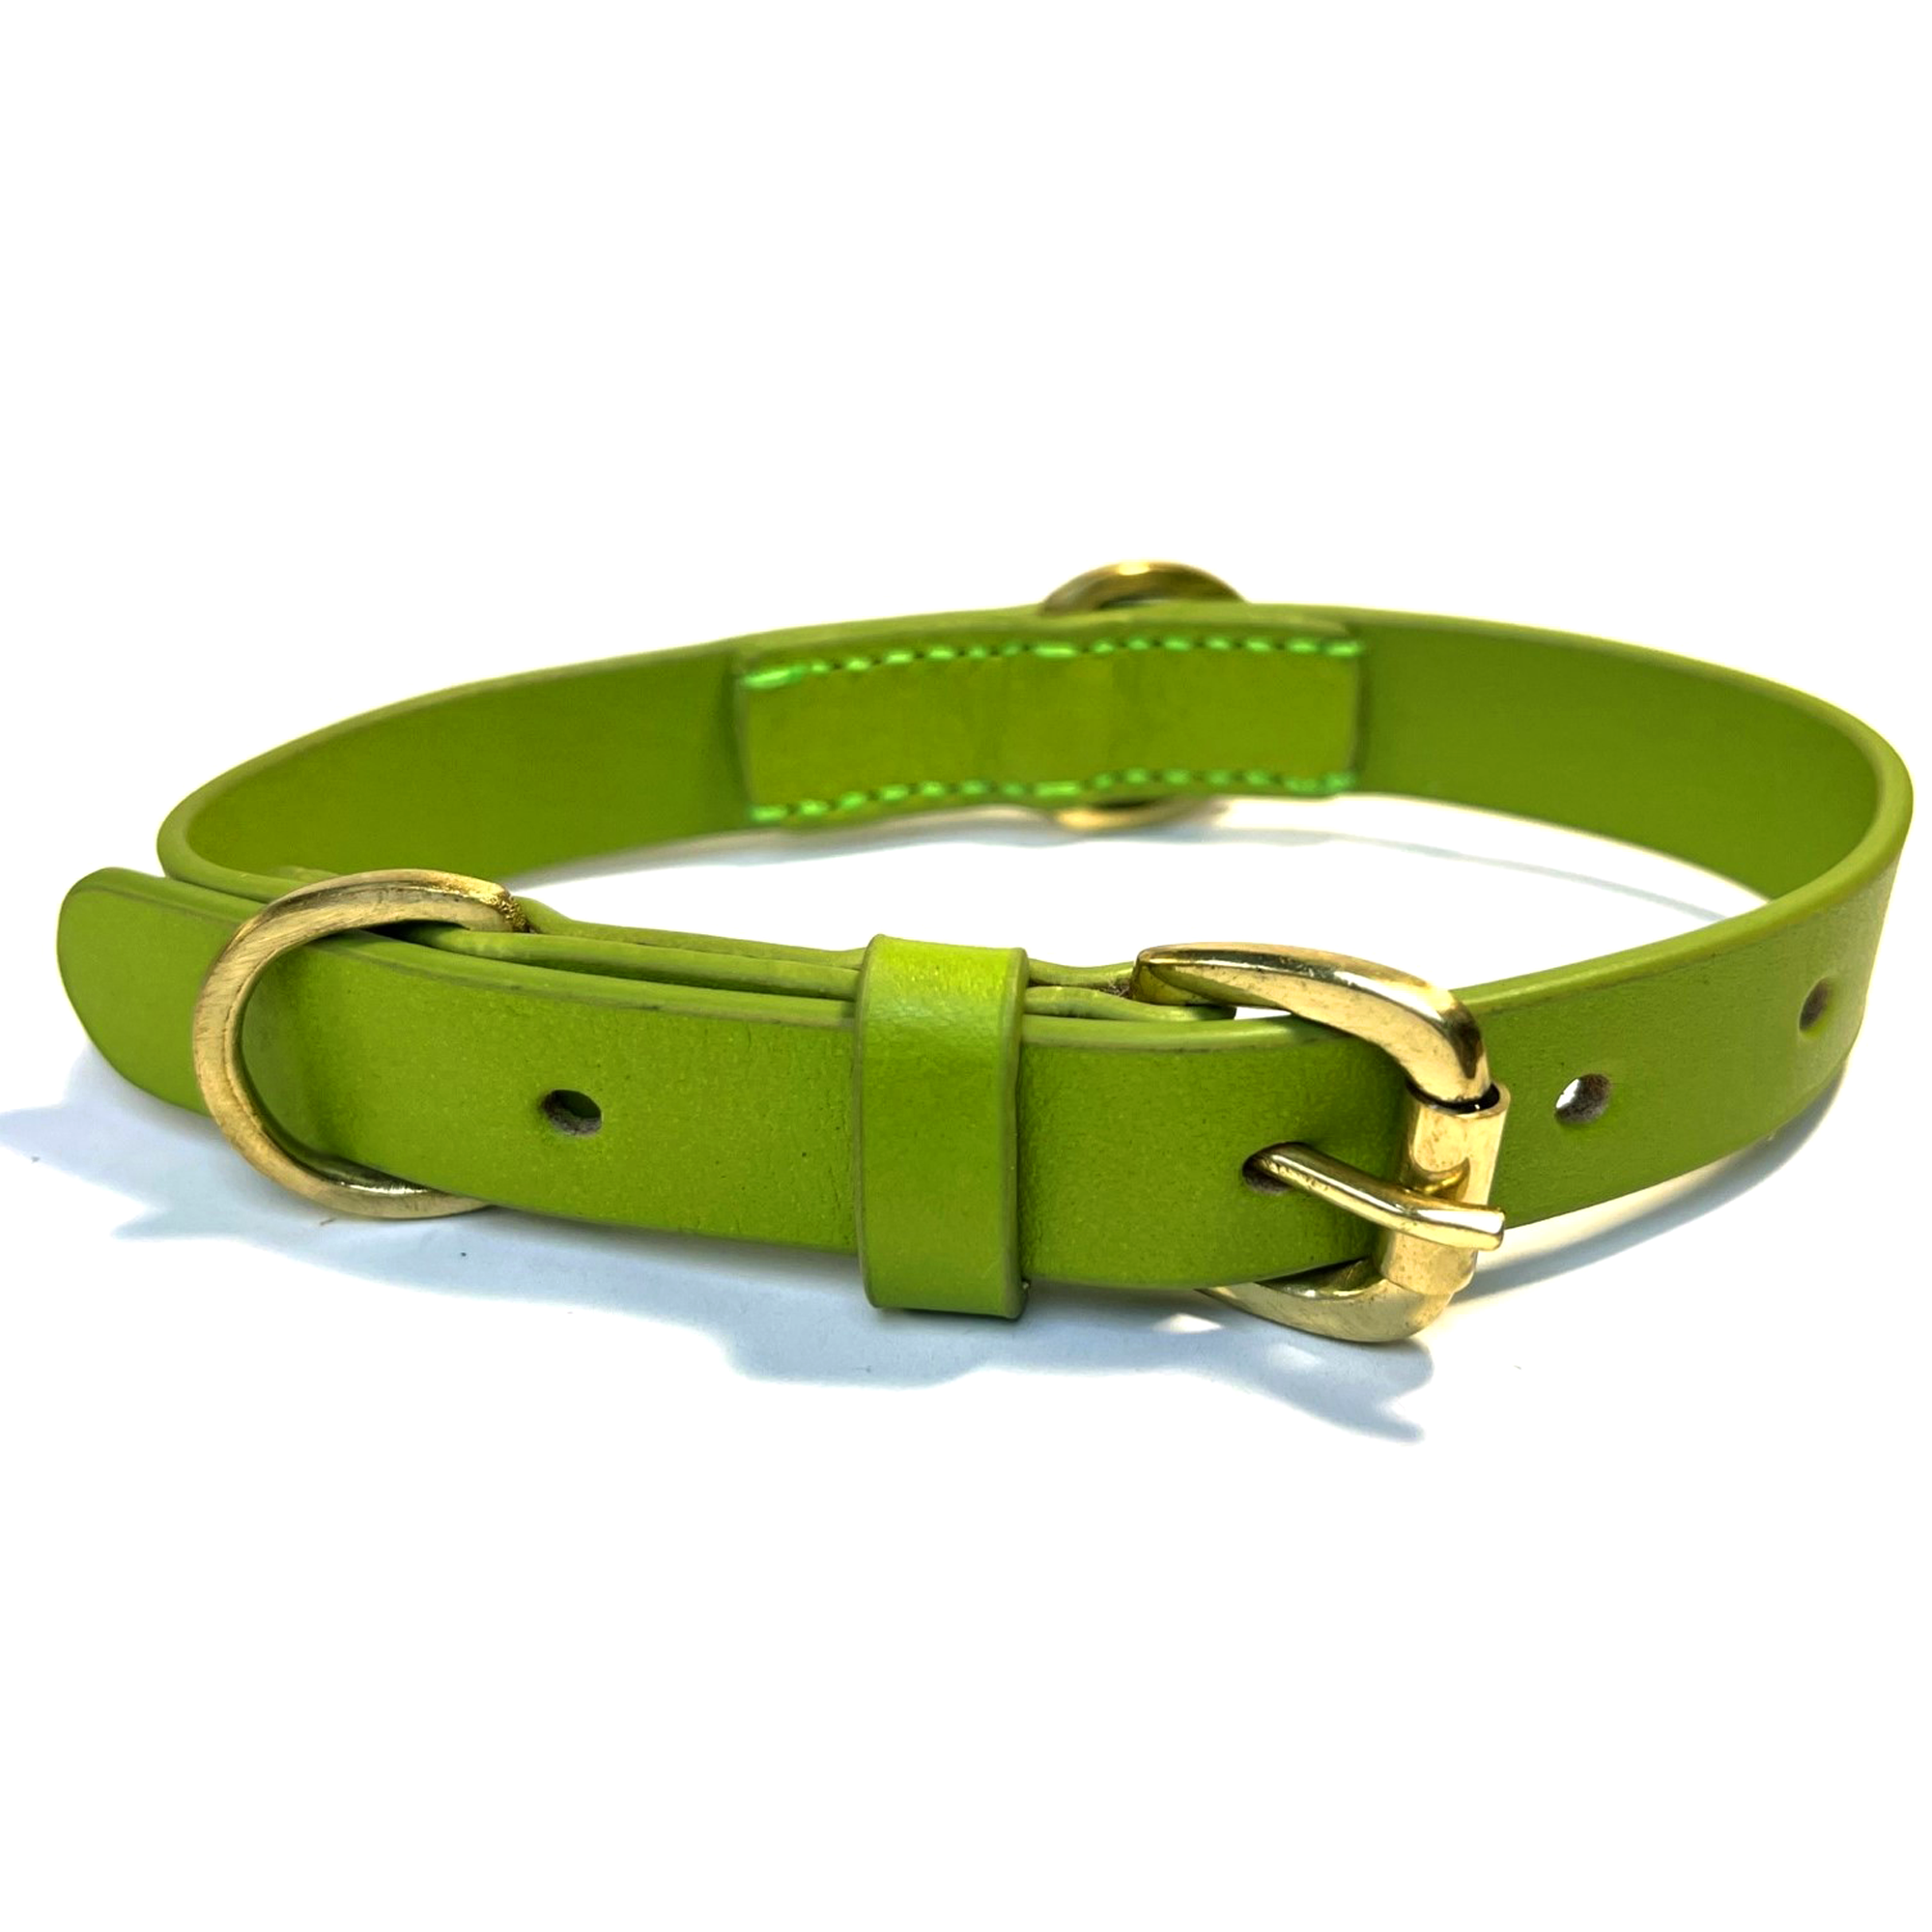 A bright green Bald Collar Mantis dog collar by Georgie Paws with antique brass hardware, displayed against a white background. The collar has a loop for leash attachment and multiple holes for size adjustment.